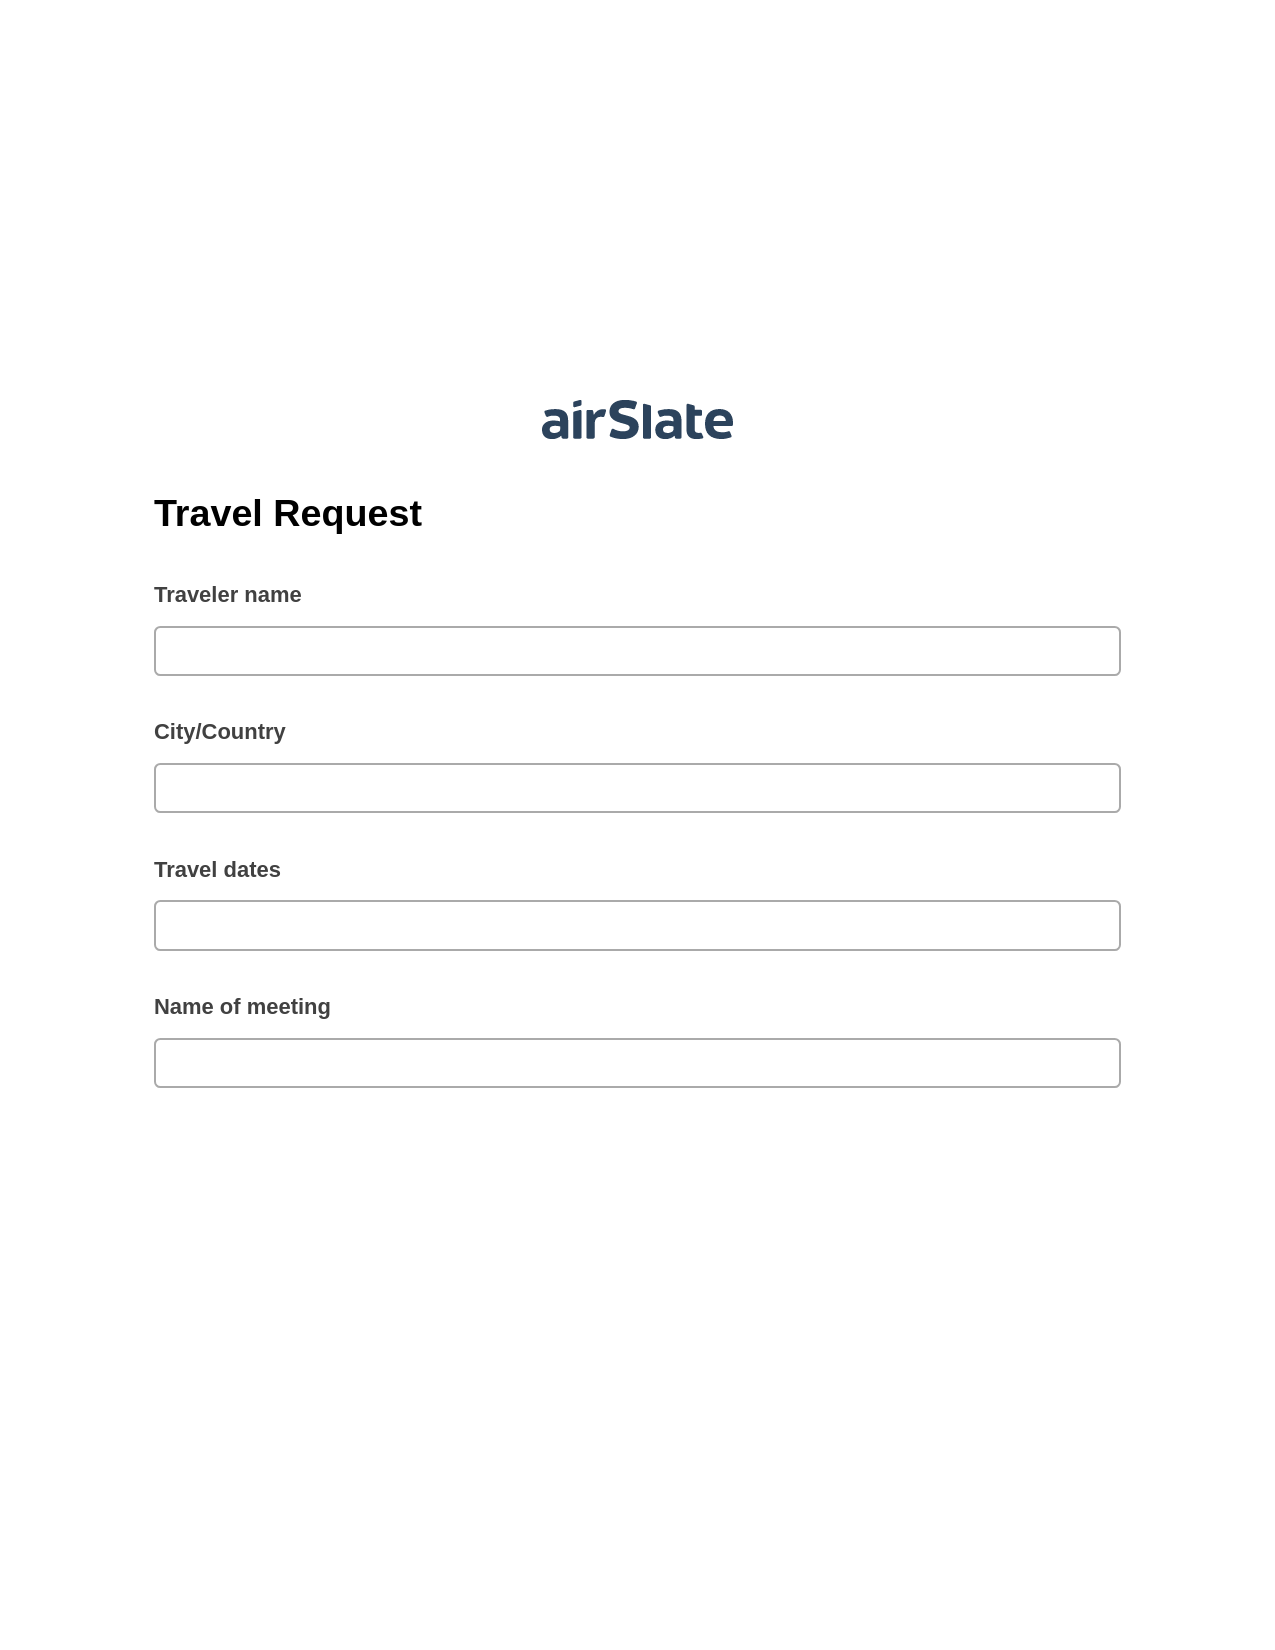 Travel Request Pre-fill from CSV File Bot, Create Salesforce Record Bot, Export to Formstack Documents Bot